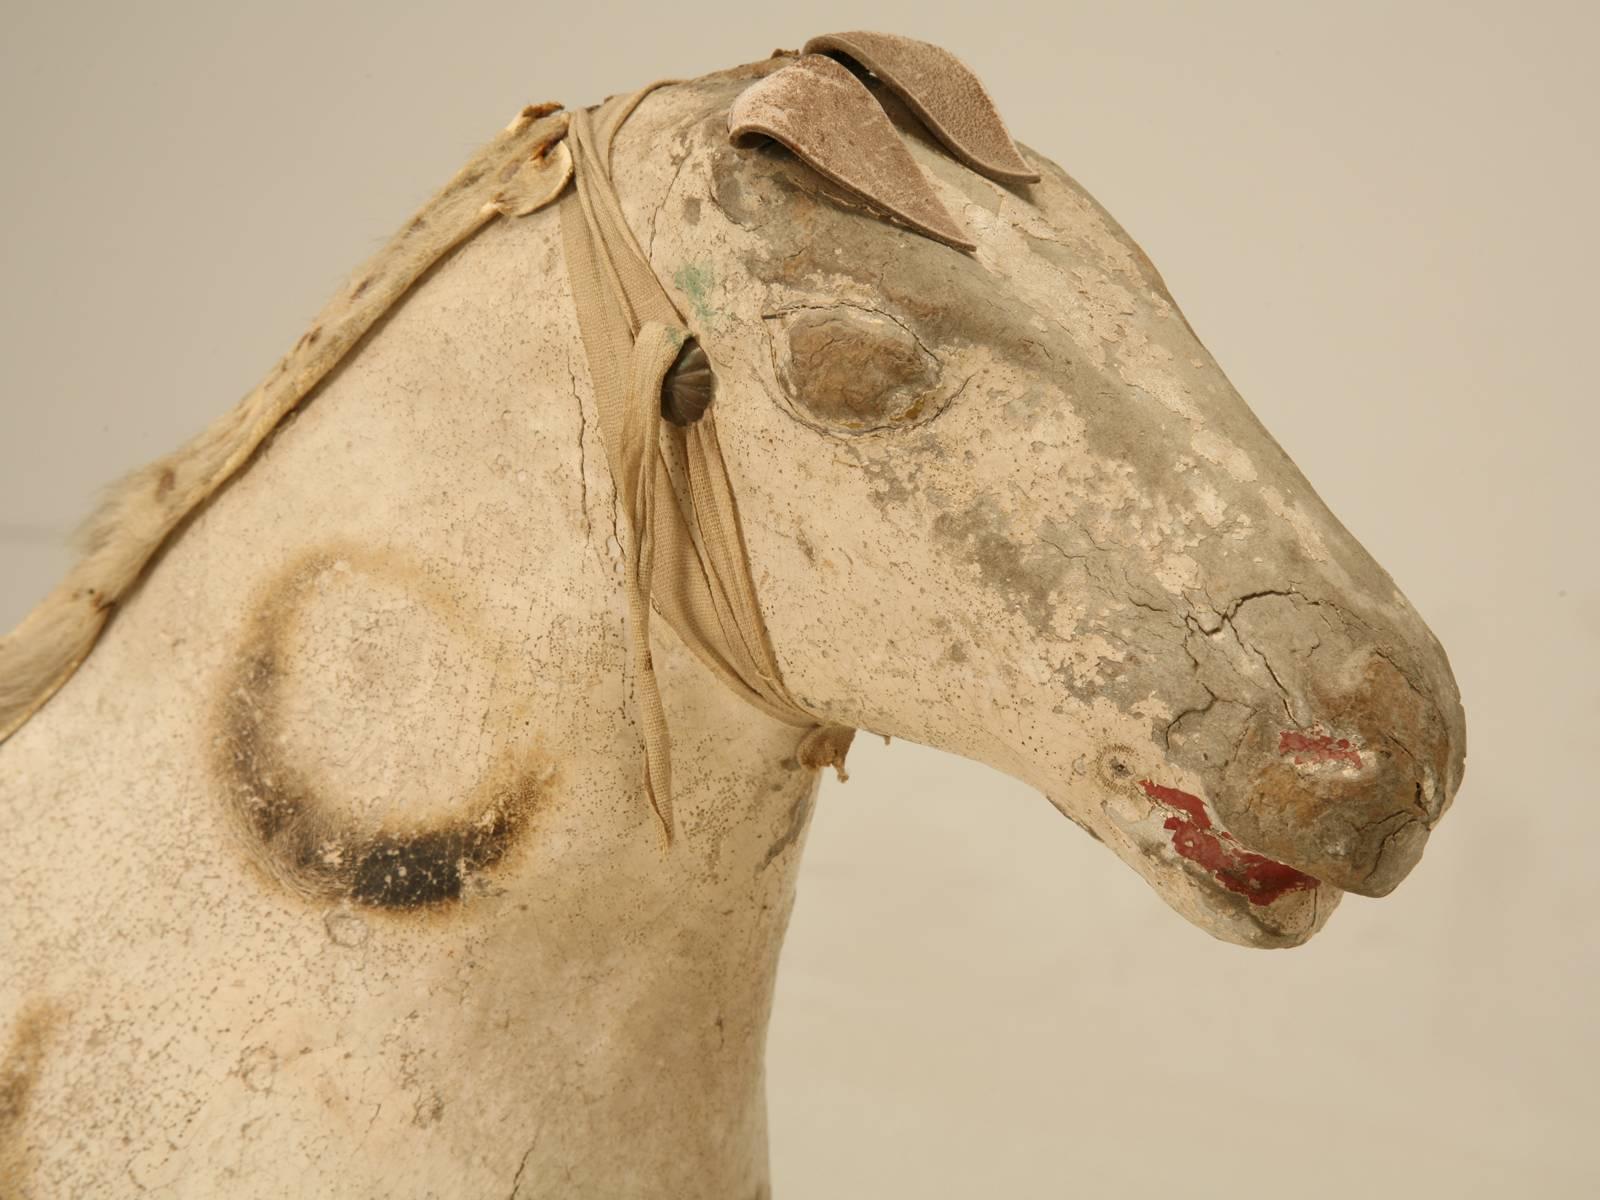 Antique Child’s Horse made from Papier Mâché draped over a Wooden Frame and purchased in America about 40 years ago. Makes for a great design accessory for a kid’s bedroom or?.